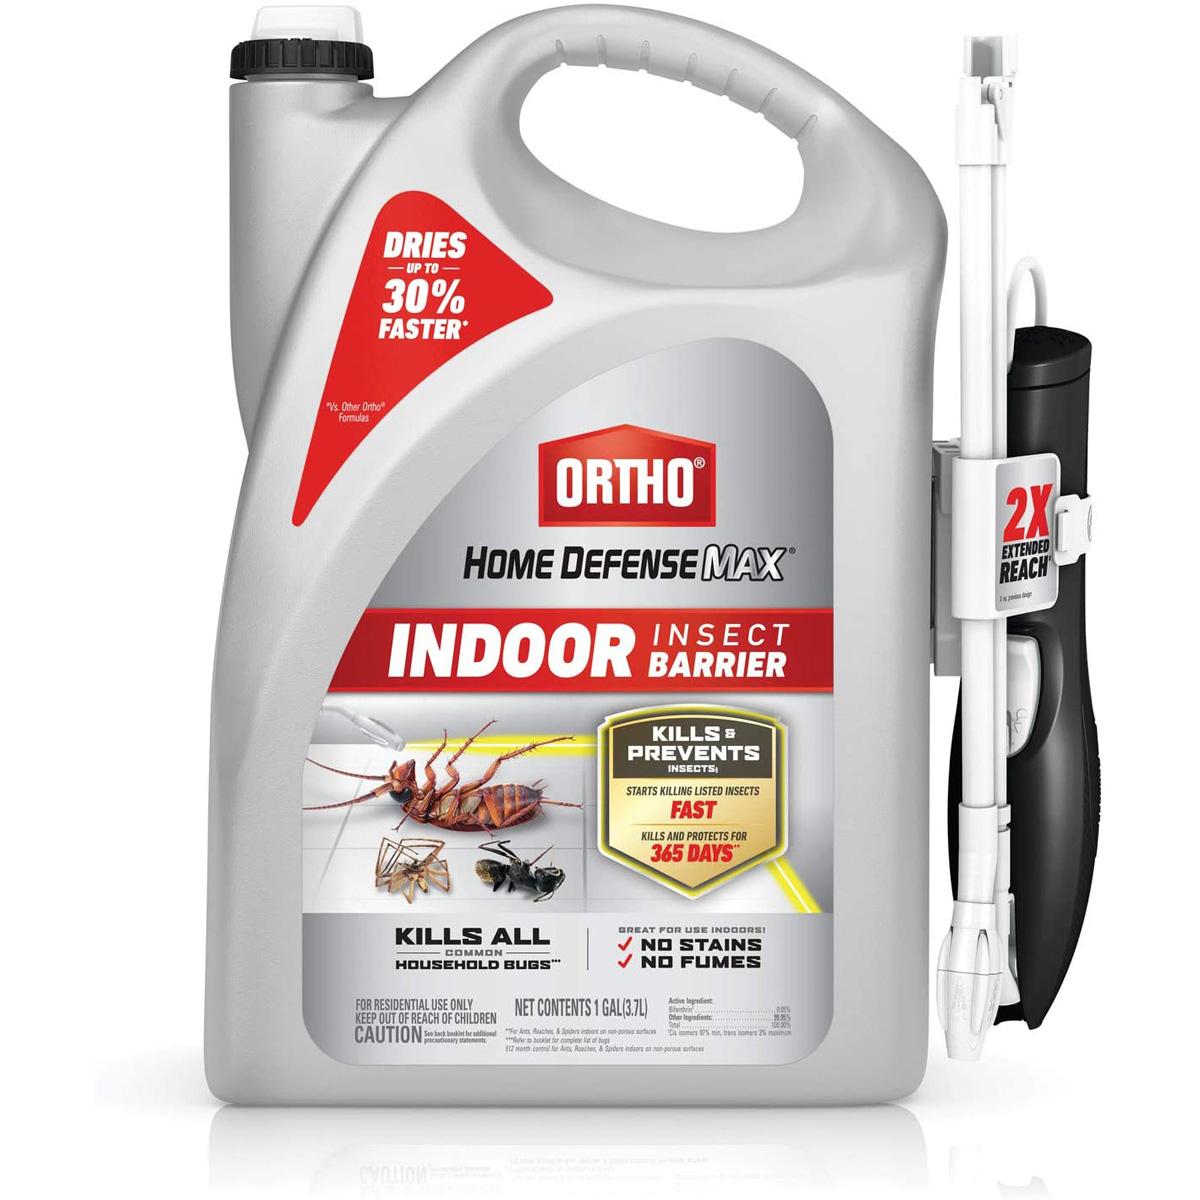 1-Gallon Ortho Home Defense Max Indoor Insect Barrier for $7.65